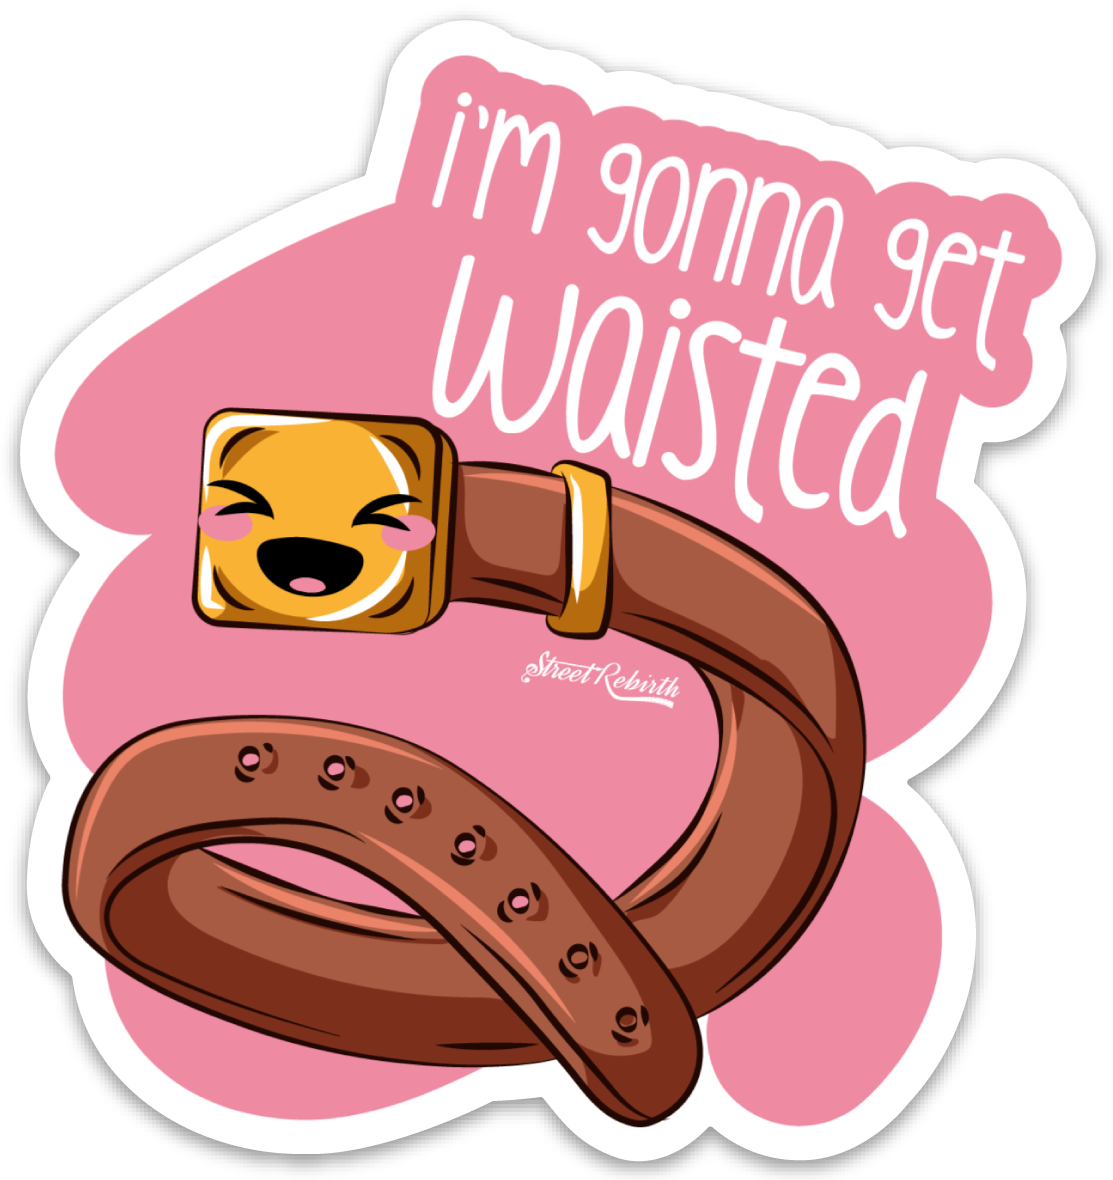 I'm  Gonna Get Waisted PUN STICKER – ONE 4 INCH WATER PROOF VINYL STICKER – FOR HYDRO FLASK, SKATEBOARD, LAPTOP, PLANNER, CAR, COLLECTING, GIFTING